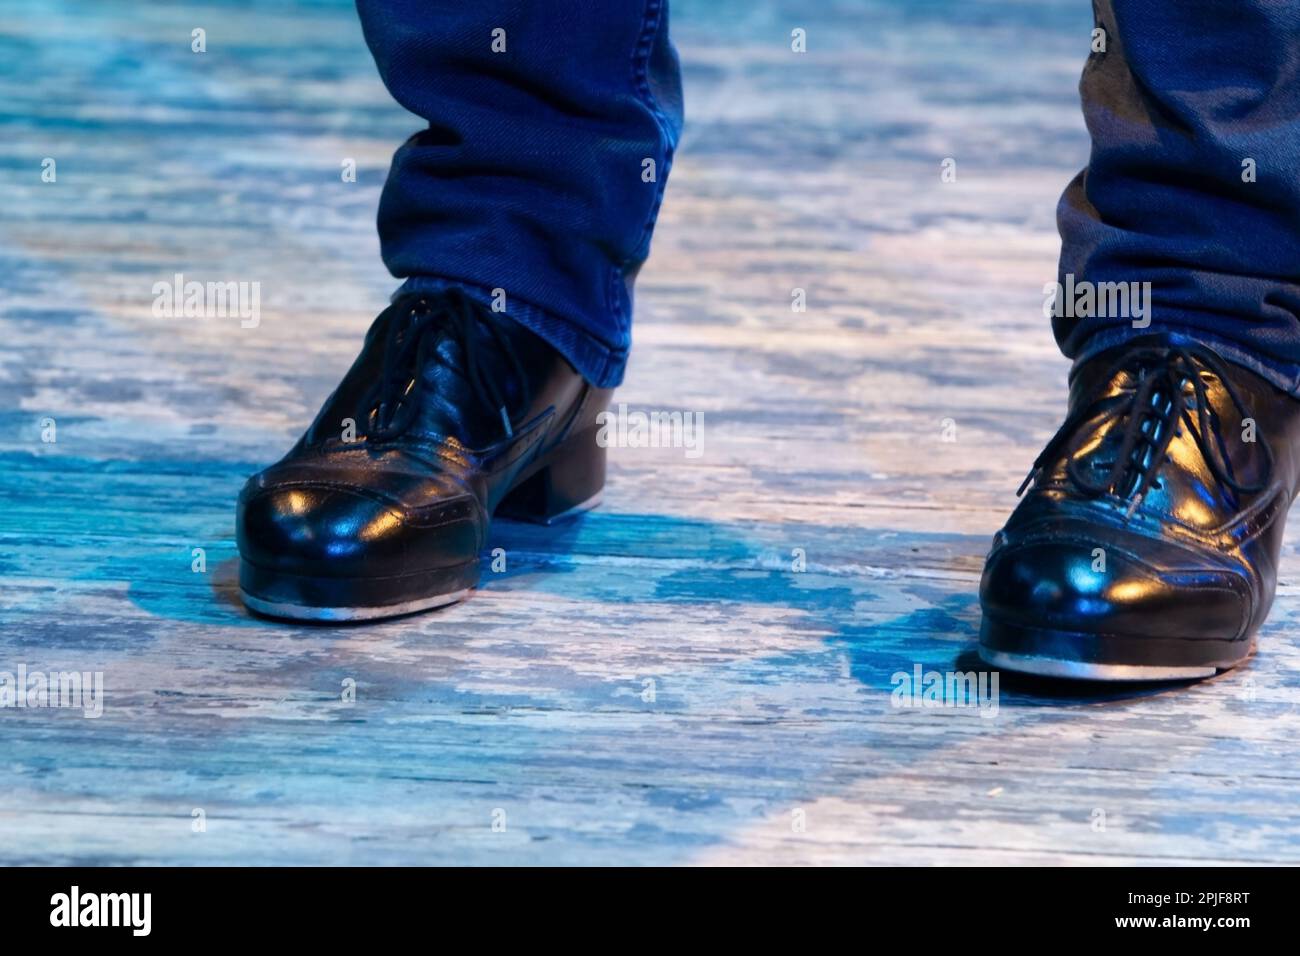 Men's legs in motion in stage trousers with stripes and leather shoes for Irish dancing on the floor. Black work boots for tap dancing with reflection Stock Photo